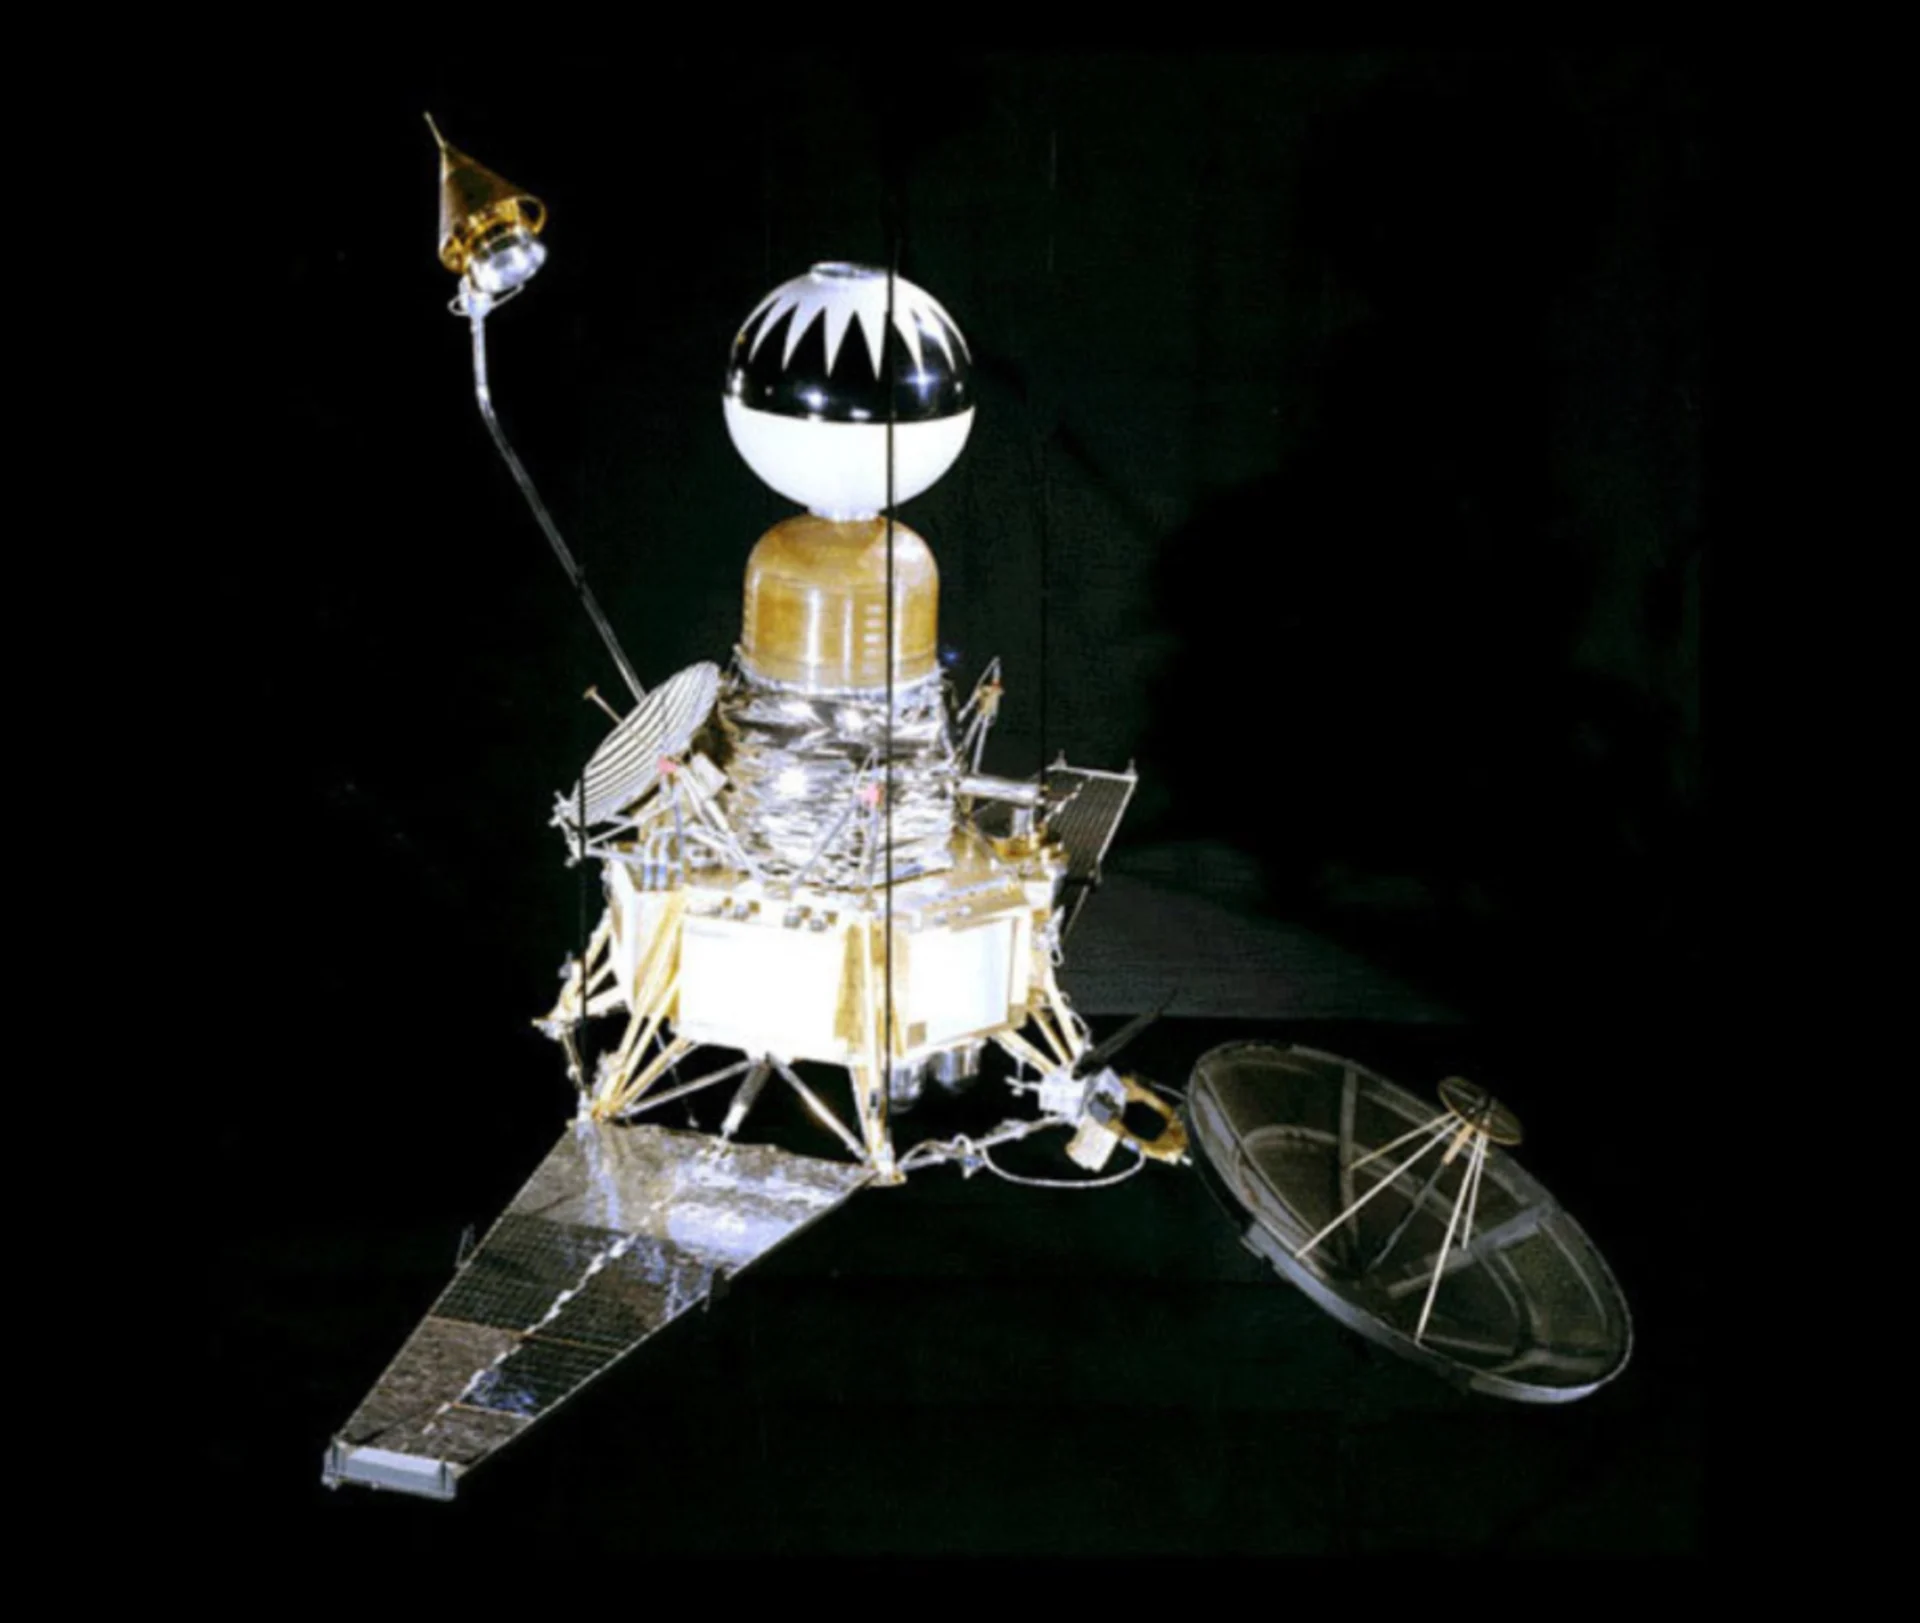 Recalling Ranger 4, first U.S. spacecraft to land on another celestial body